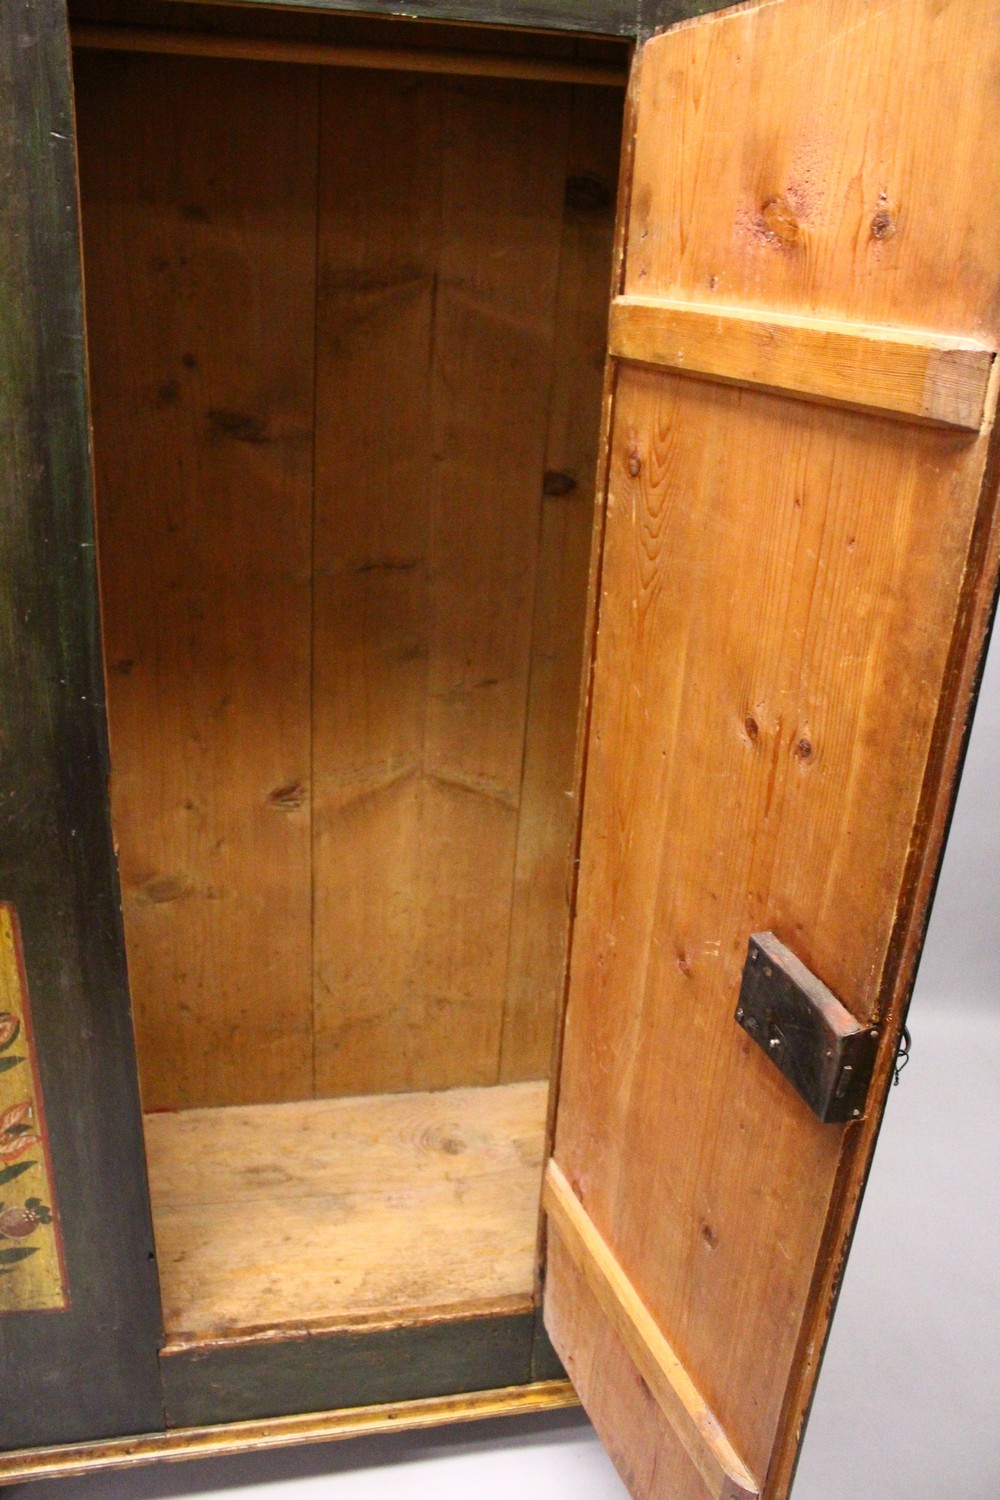 AN 18TH/19TH CENTURY AUSTRIAN PAINTED PINE CUPBOARD, with a single door, canted sides, all painted - Image 10 of 10